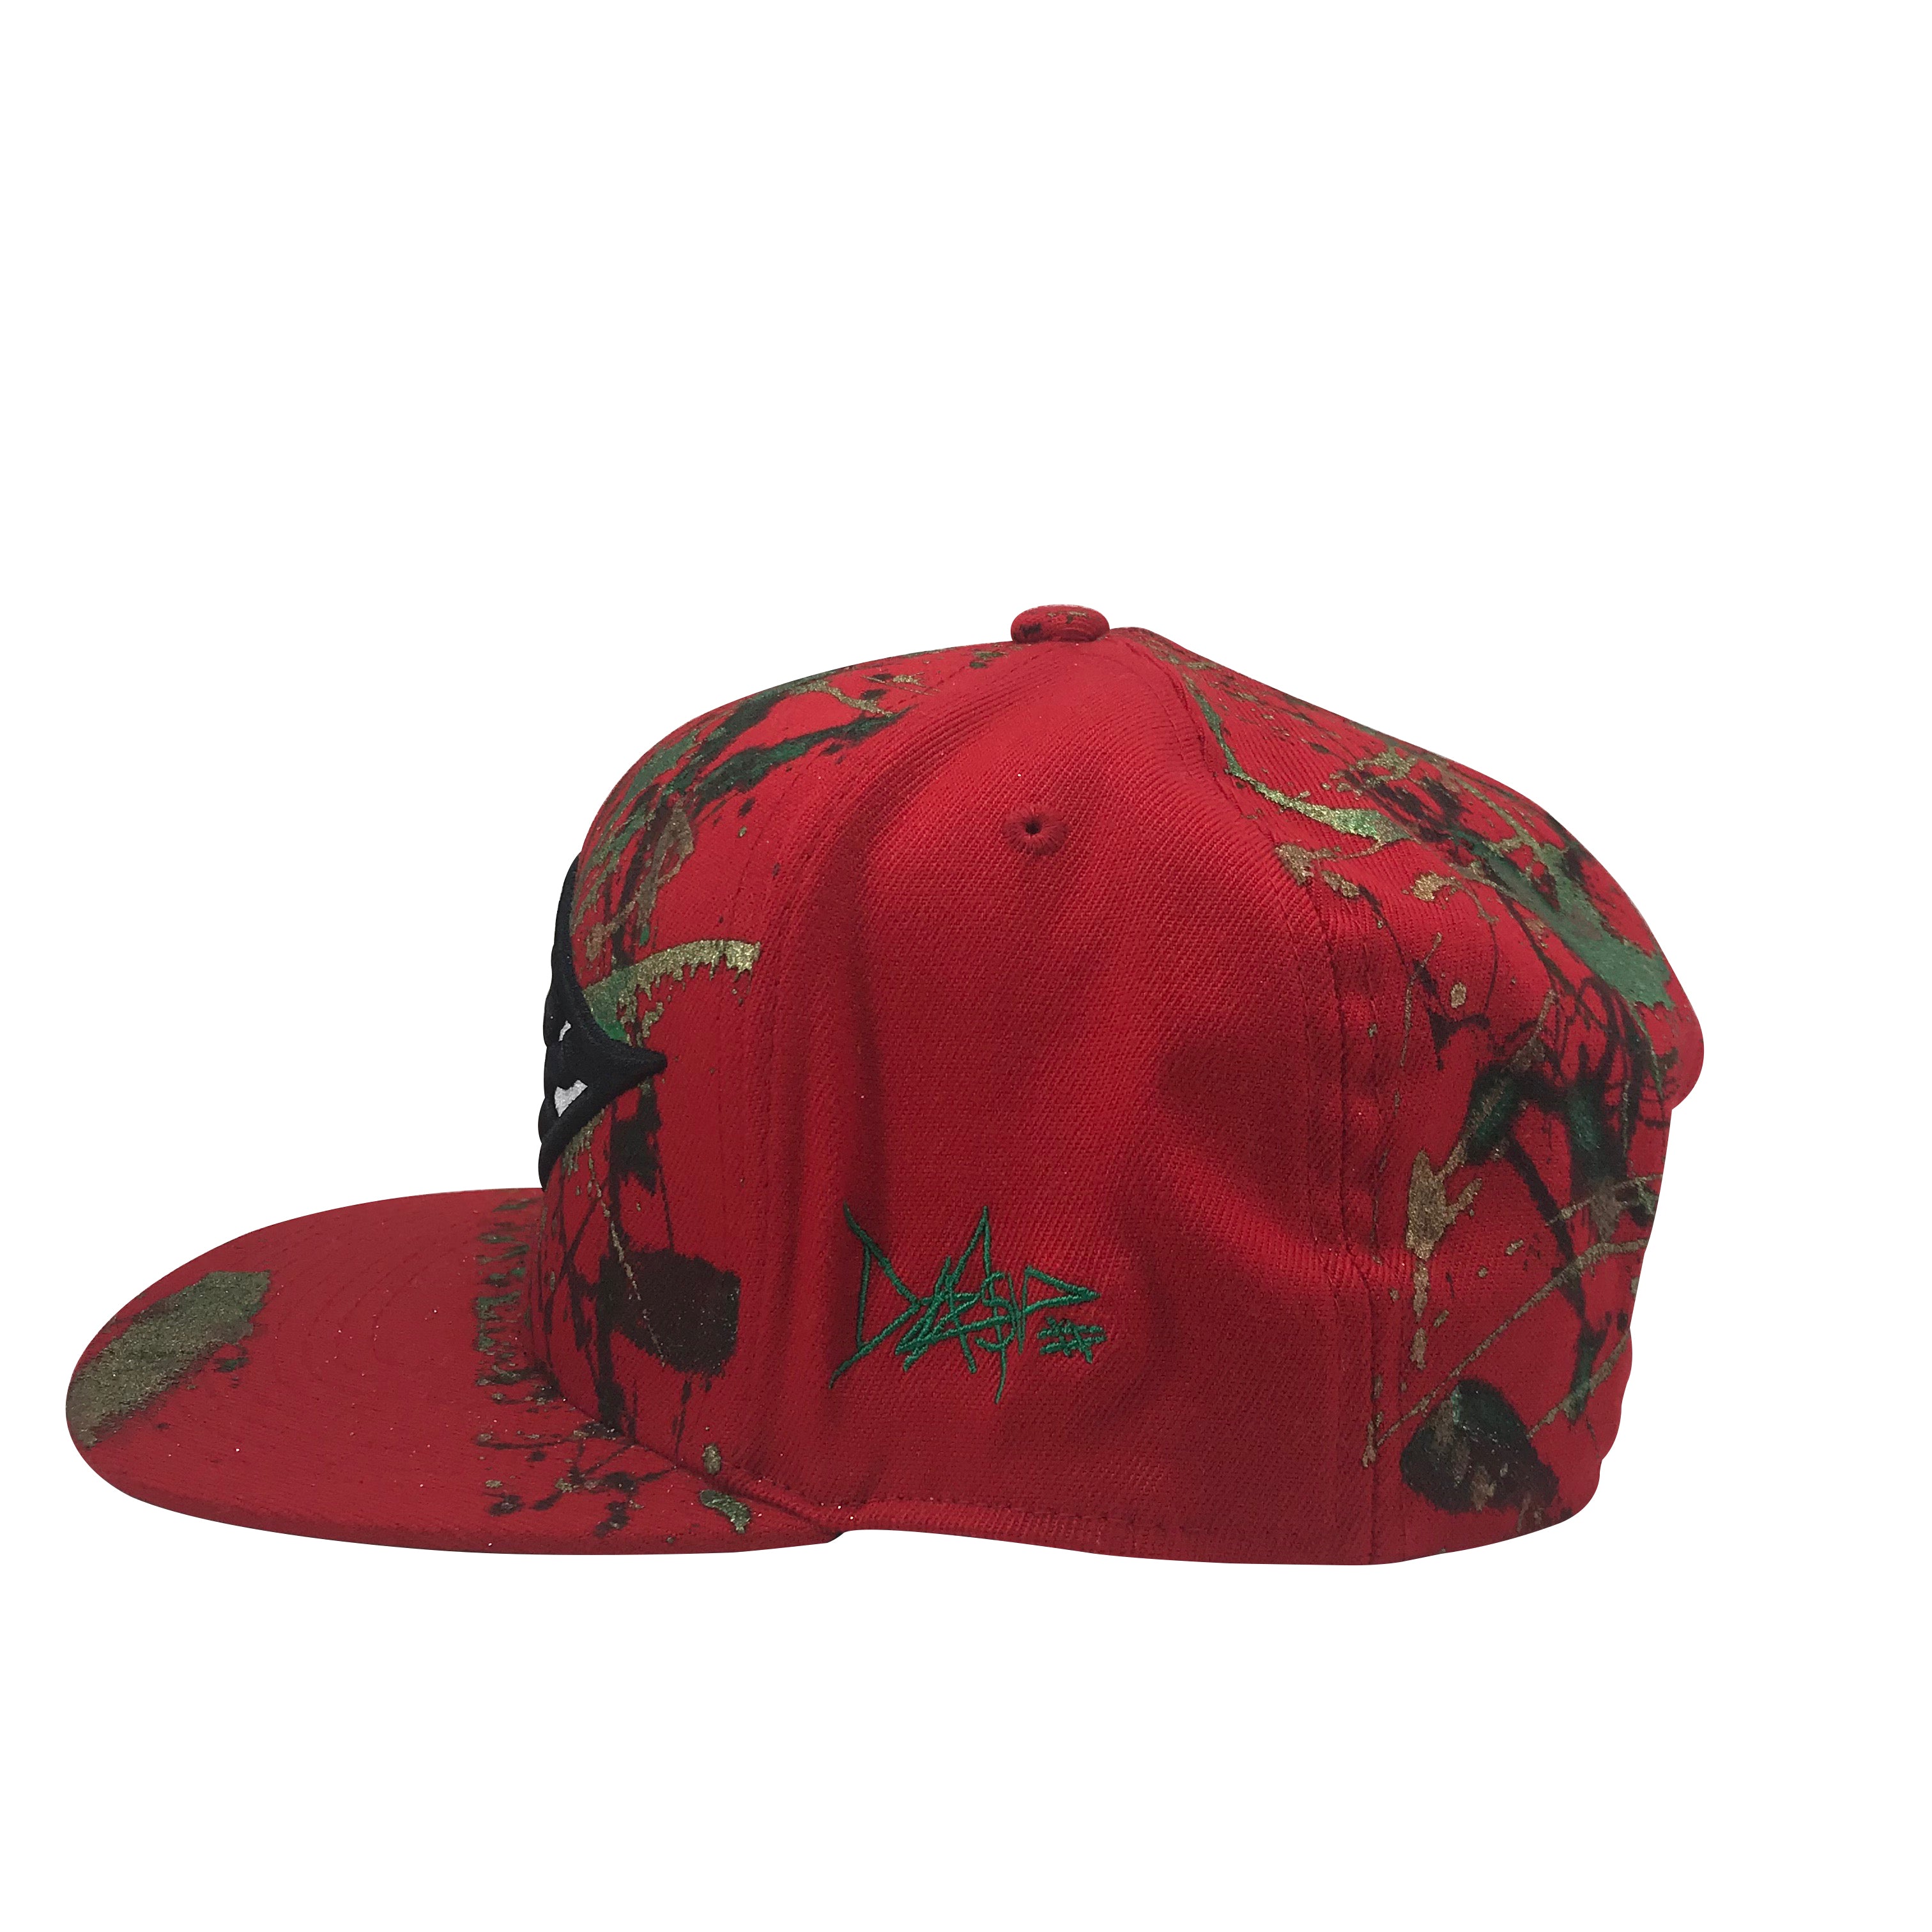 Hat - Unique hand painted / Red- green